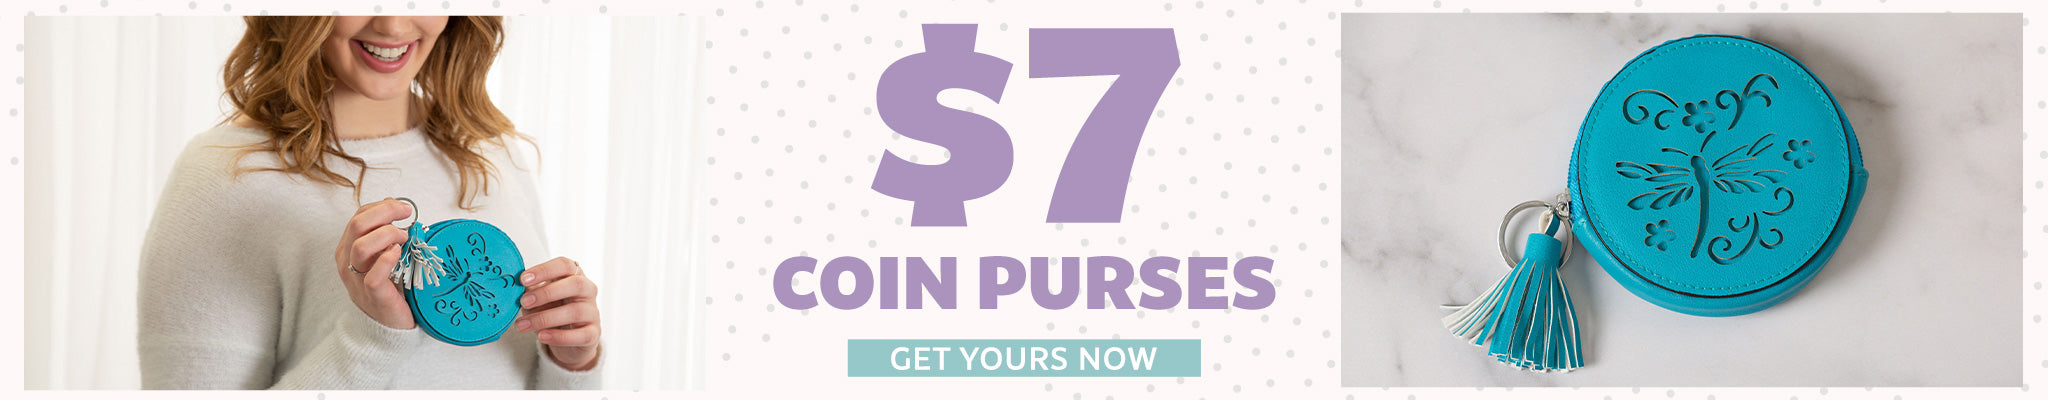 $7 Coin Purses | Today Only!